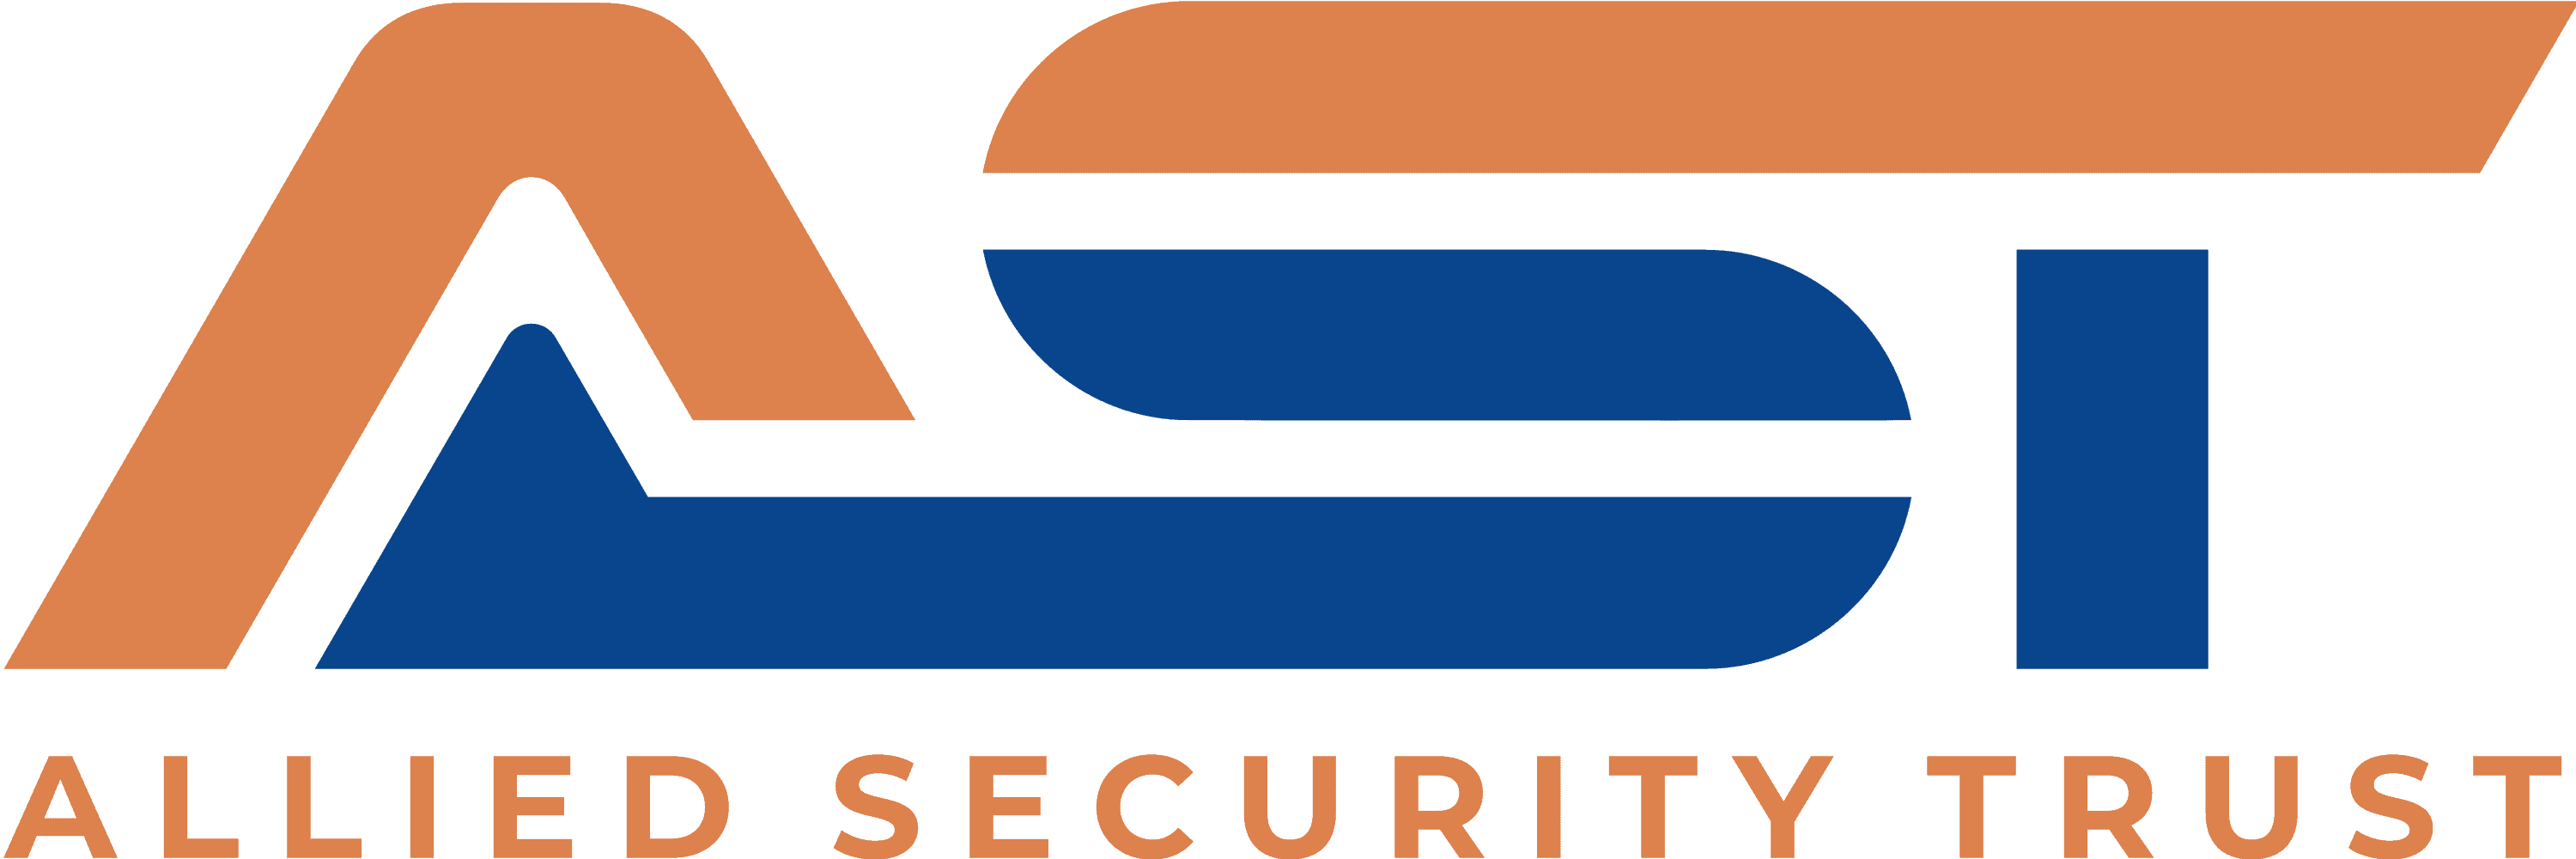 Allied Security Trust